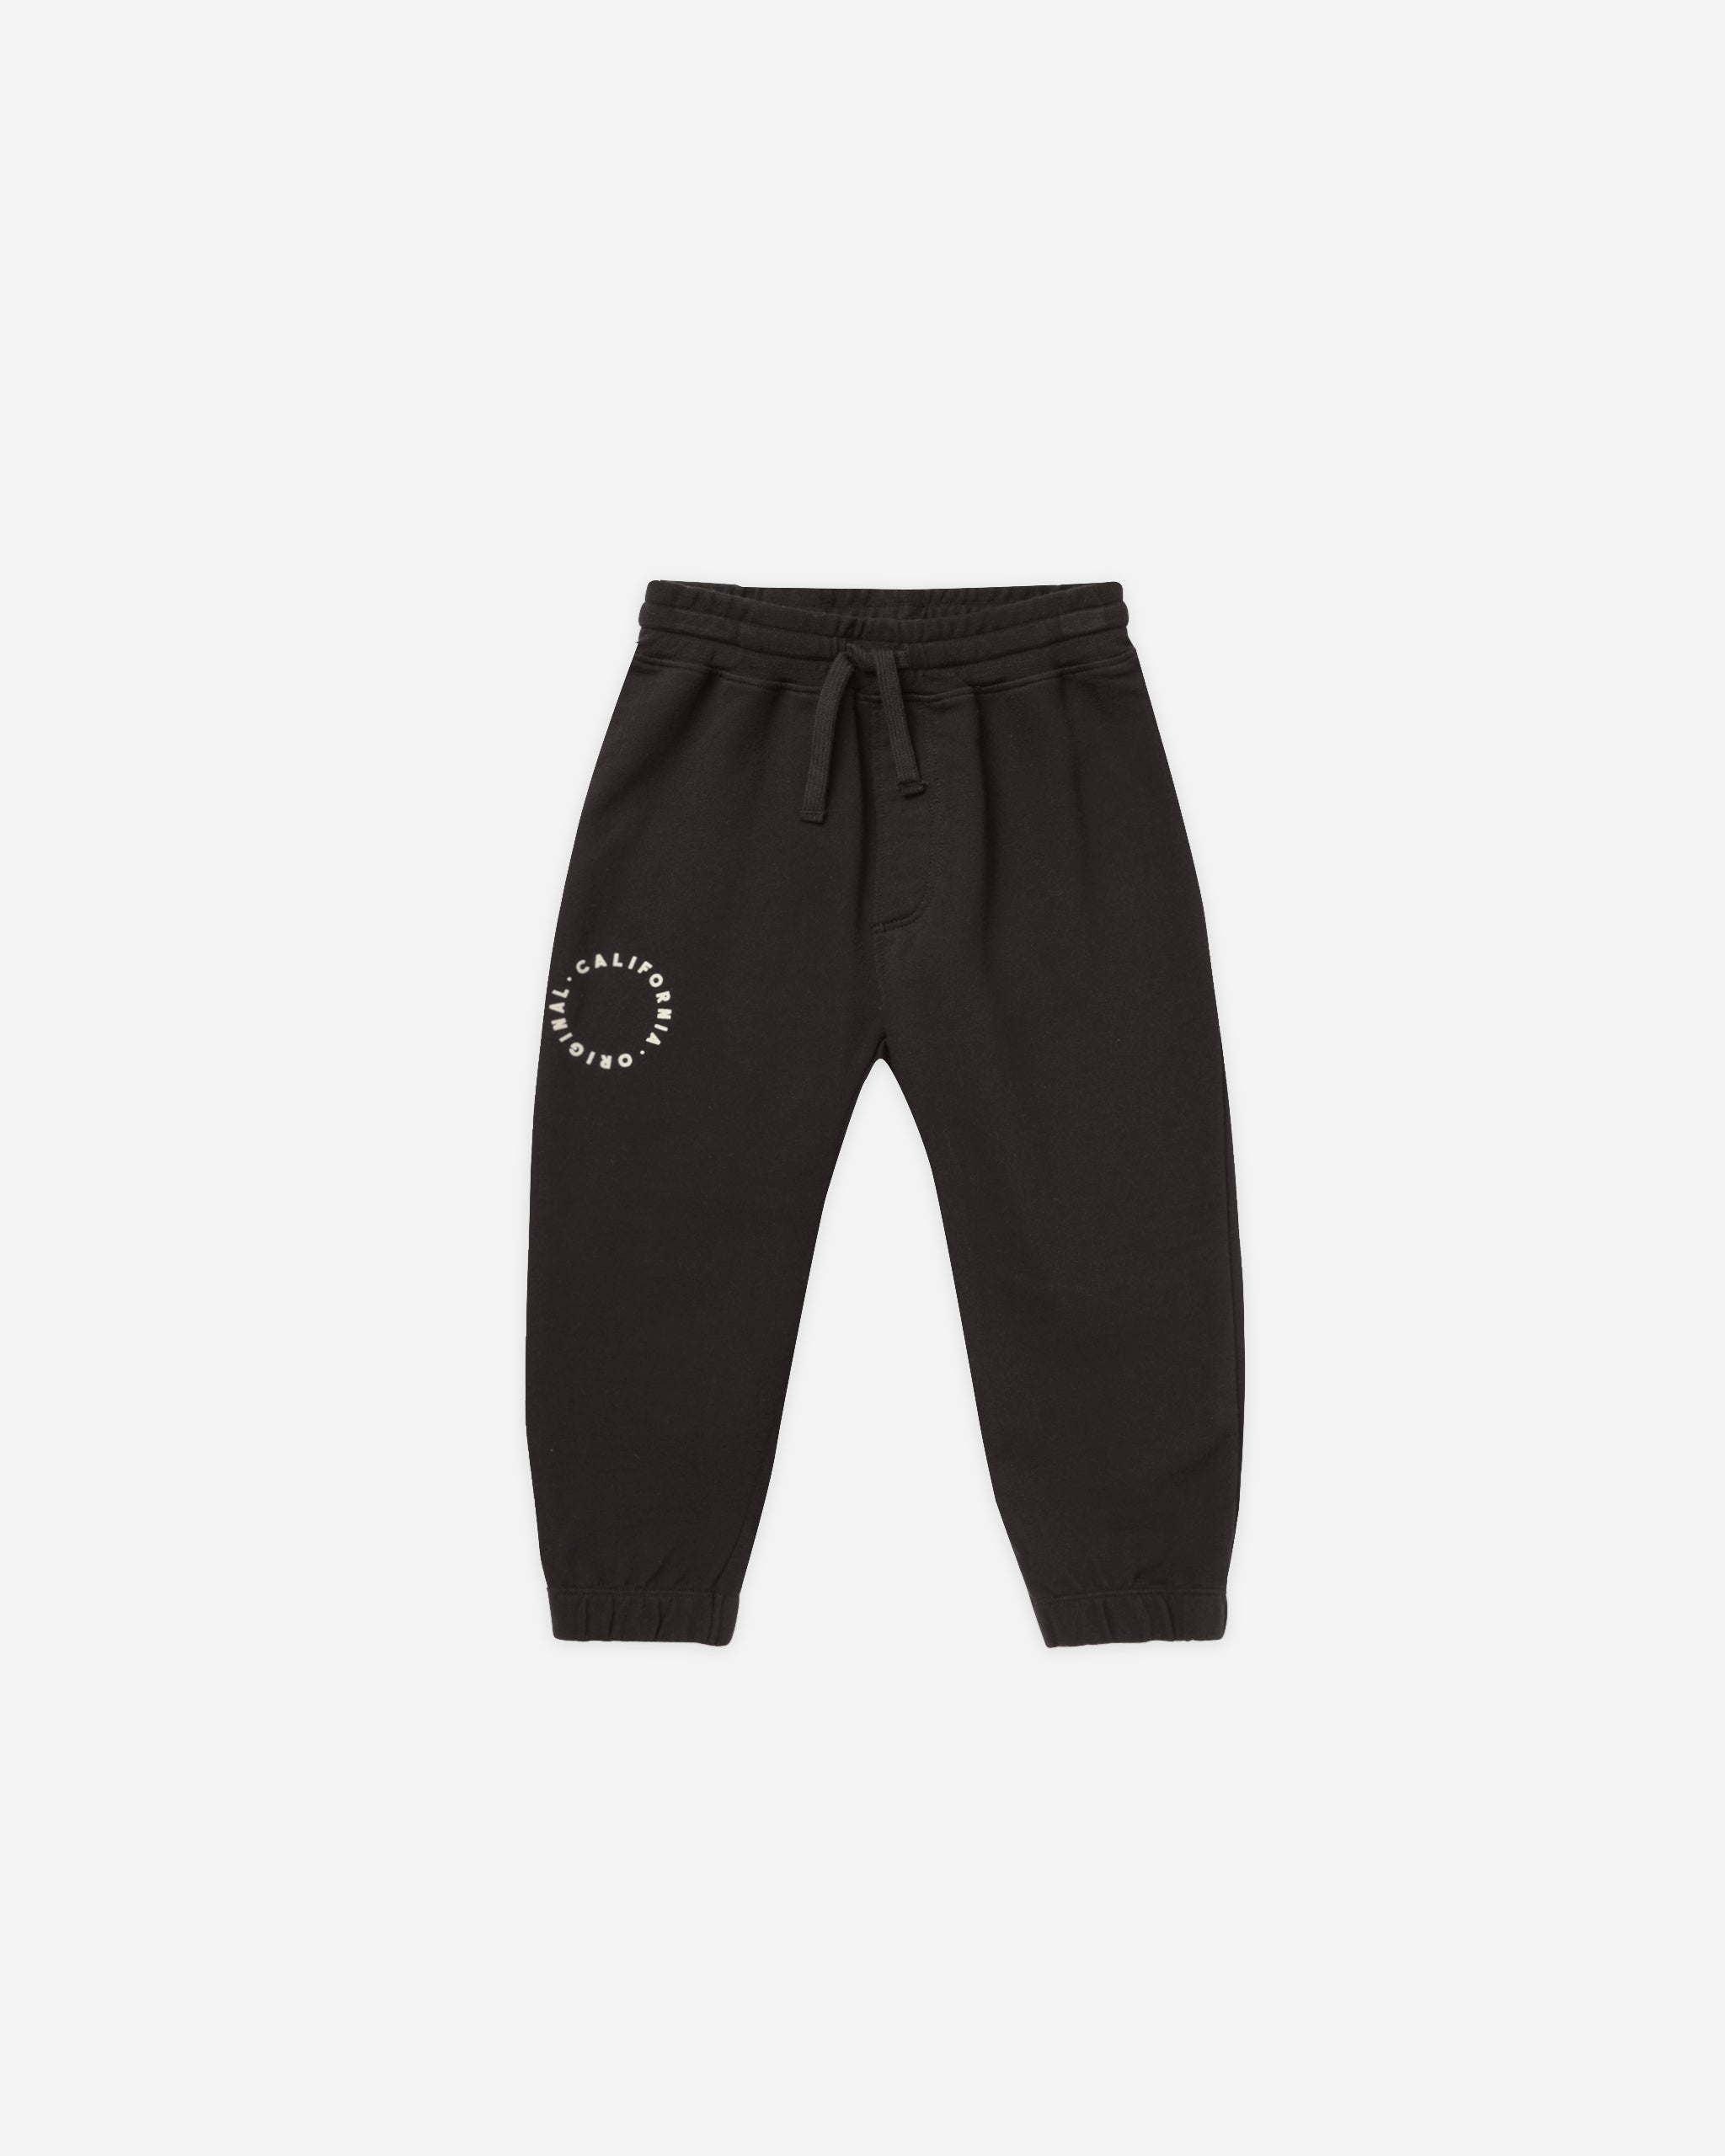 Jogger Pant || Black - Rylee + Cru | Kids Clothes | Trendy Baby Clothes | Modern Infant Outfits |